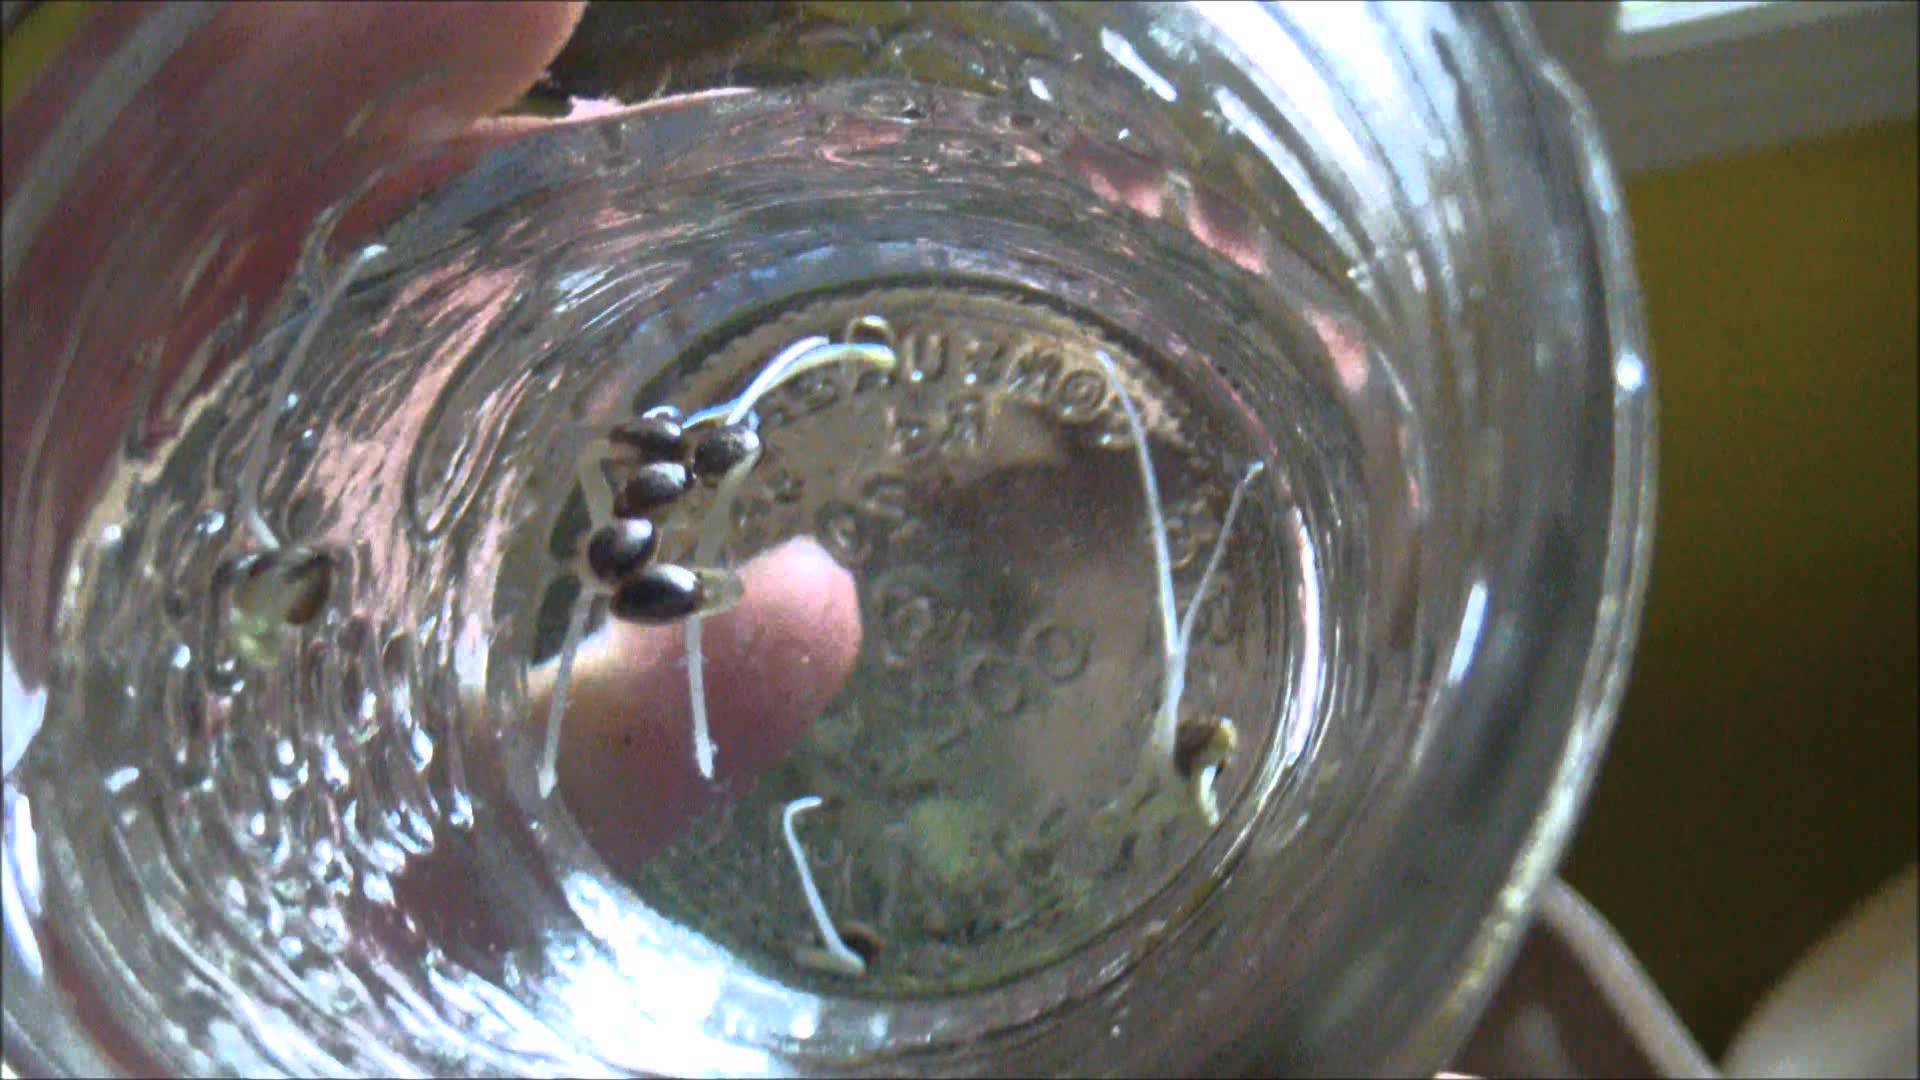 Germinating Weed Seeds in Cup of Water